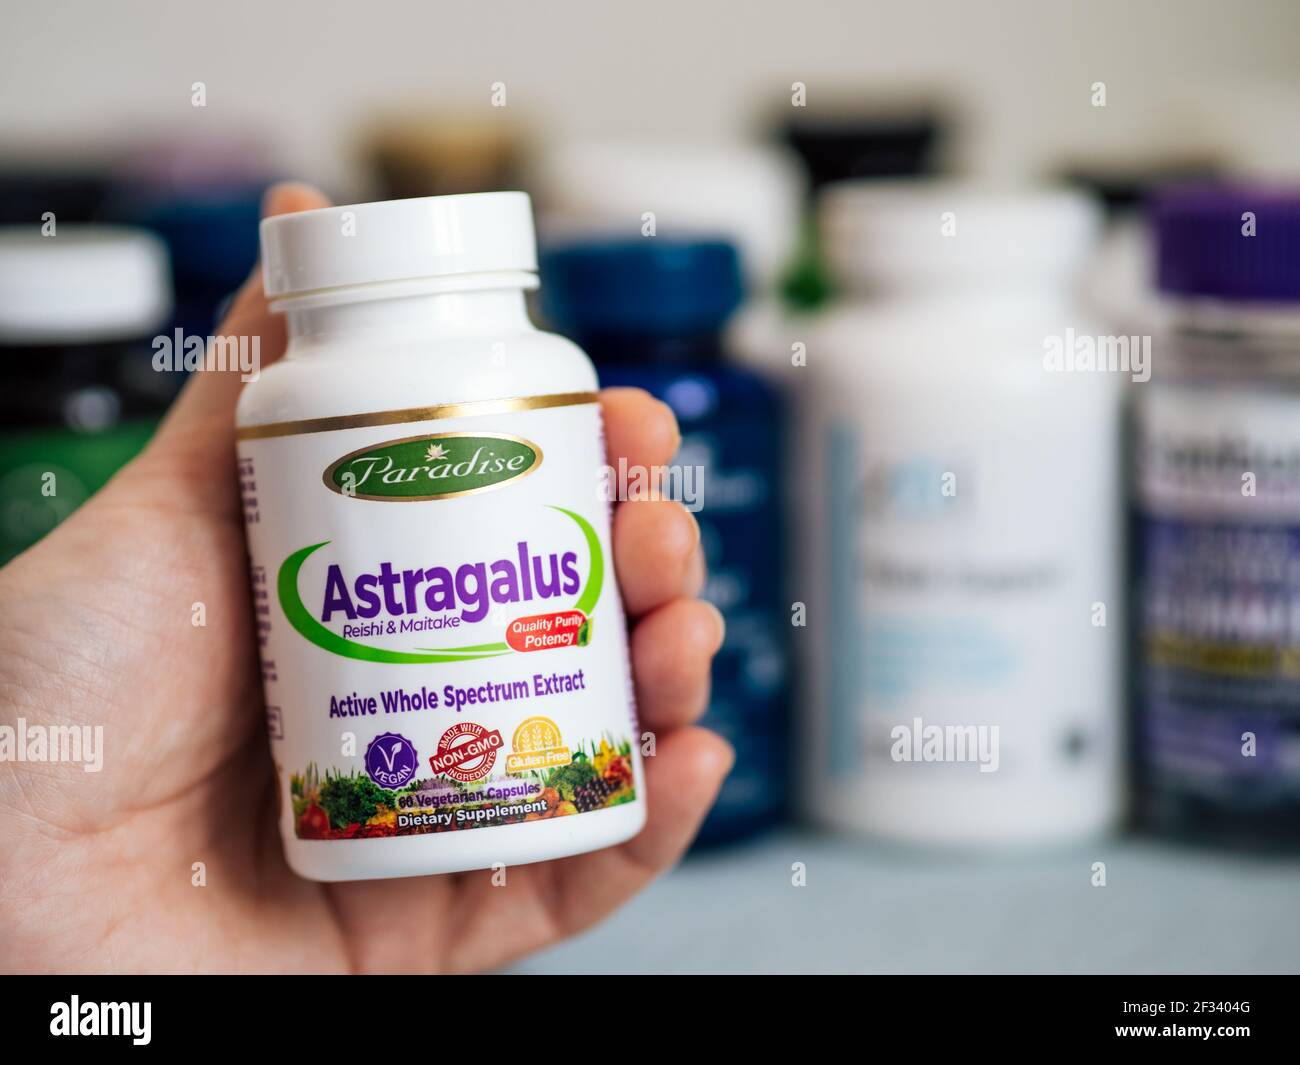 Moscow, Russia - March 09, 2021: Jar with Astragalus capsules in female hand and others nutrition supplements in blurred background. White plastic jar Astragalus by Paradise Herbs for immune support Stock Photo